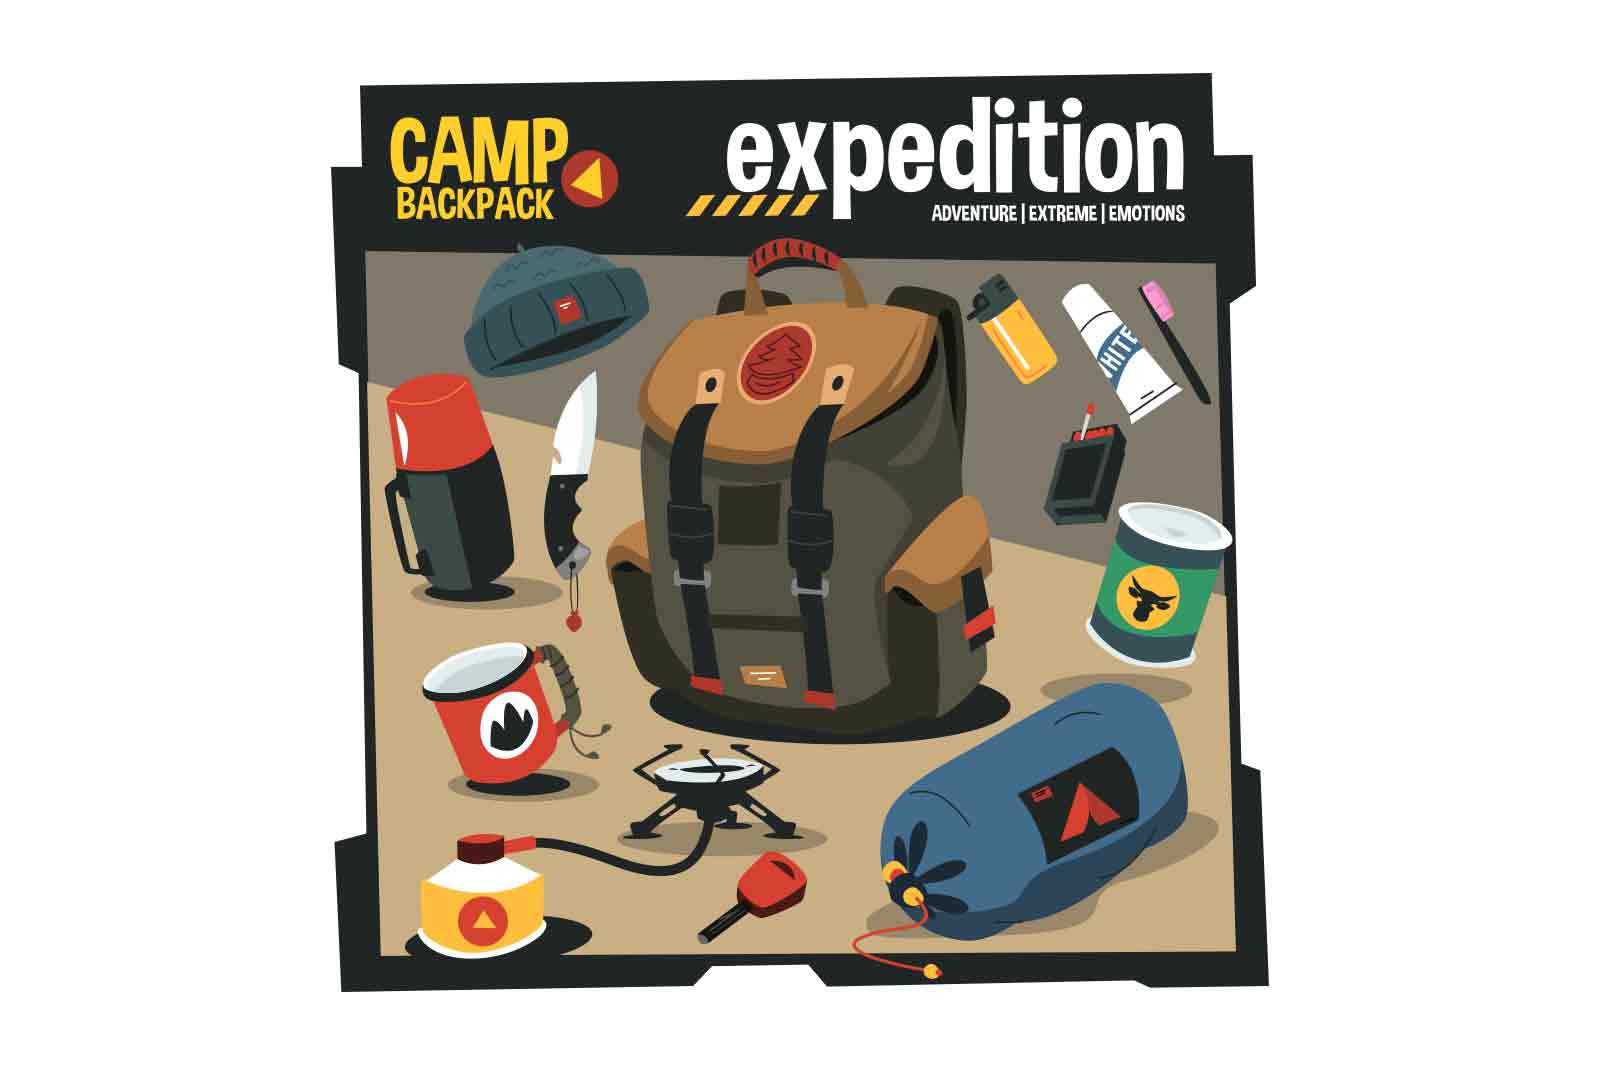 Hiking backpack and camping items set vector illustration. Tourists knapsack flat style concept. Adventure, extreme and expedition concept